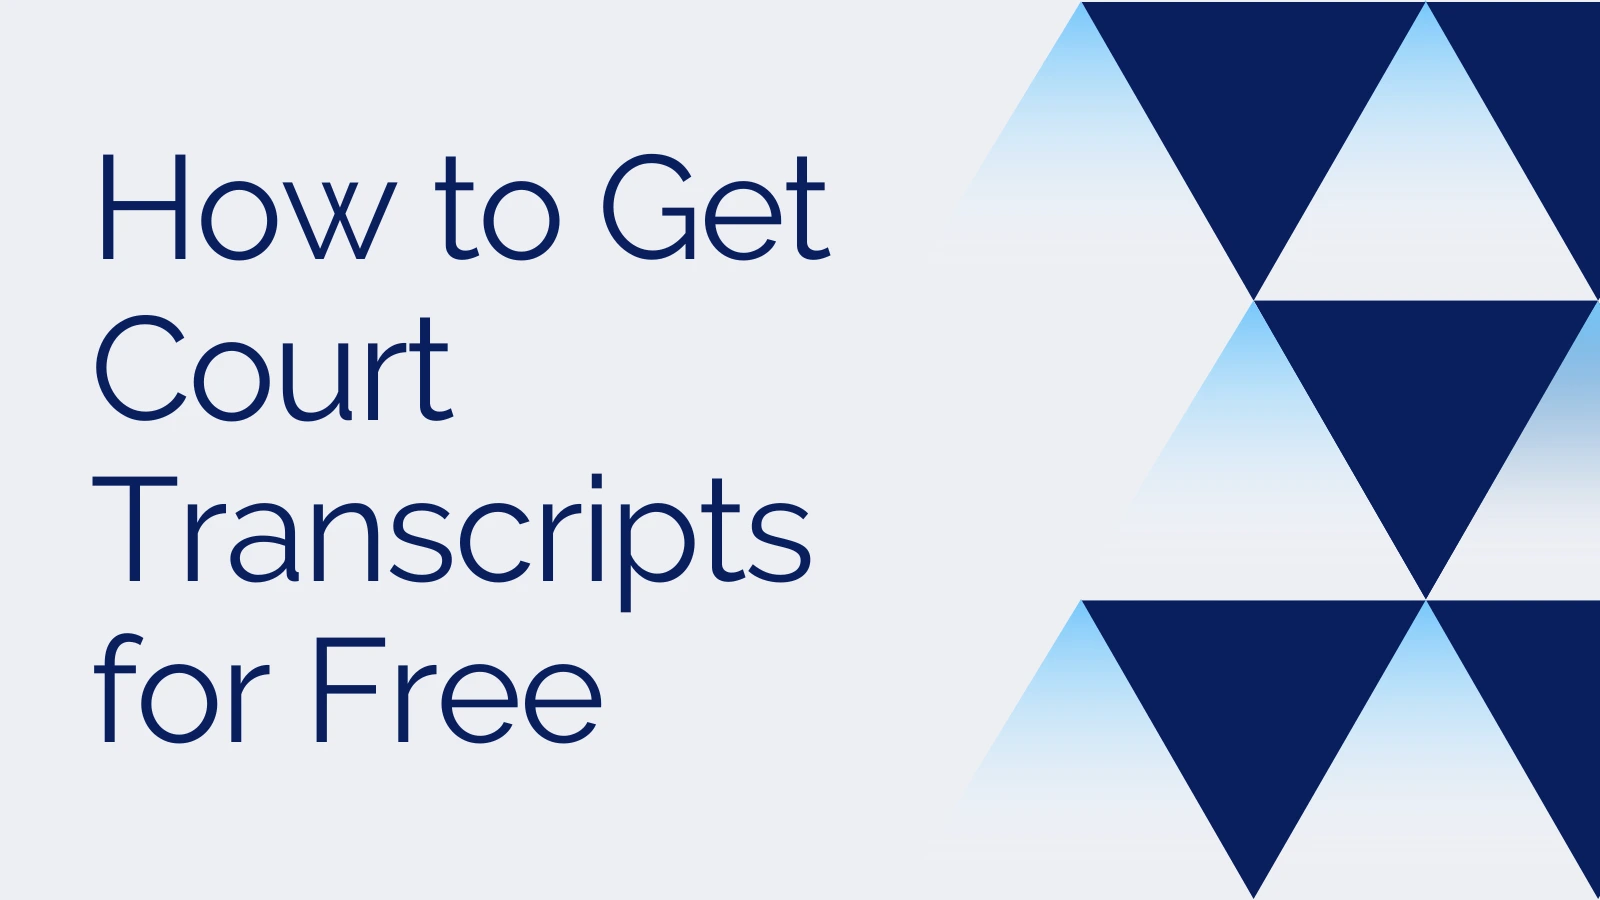 How to Get Court Transcripts for Free